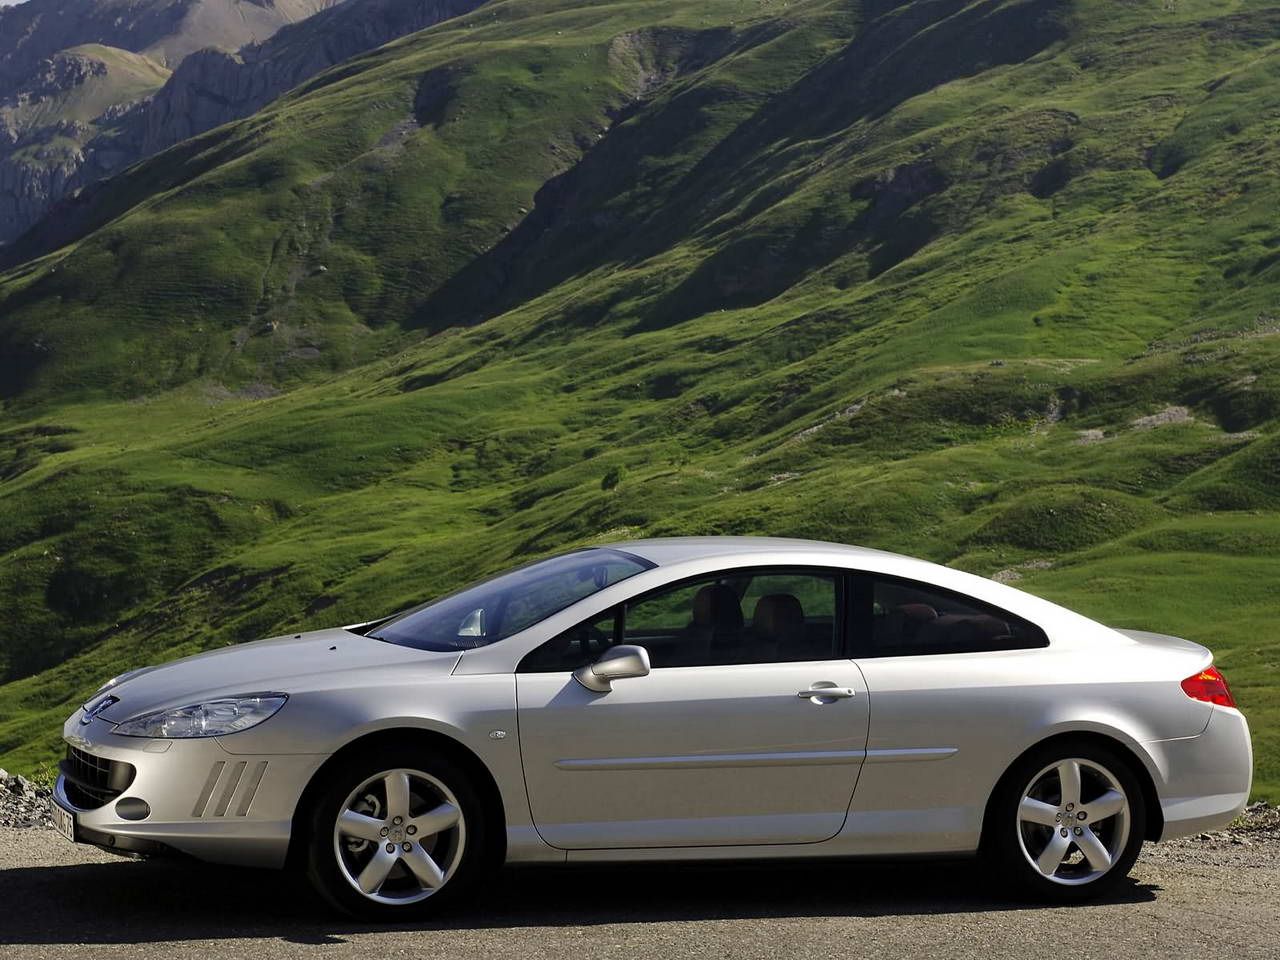 2006 Peugeot 407 Coupe